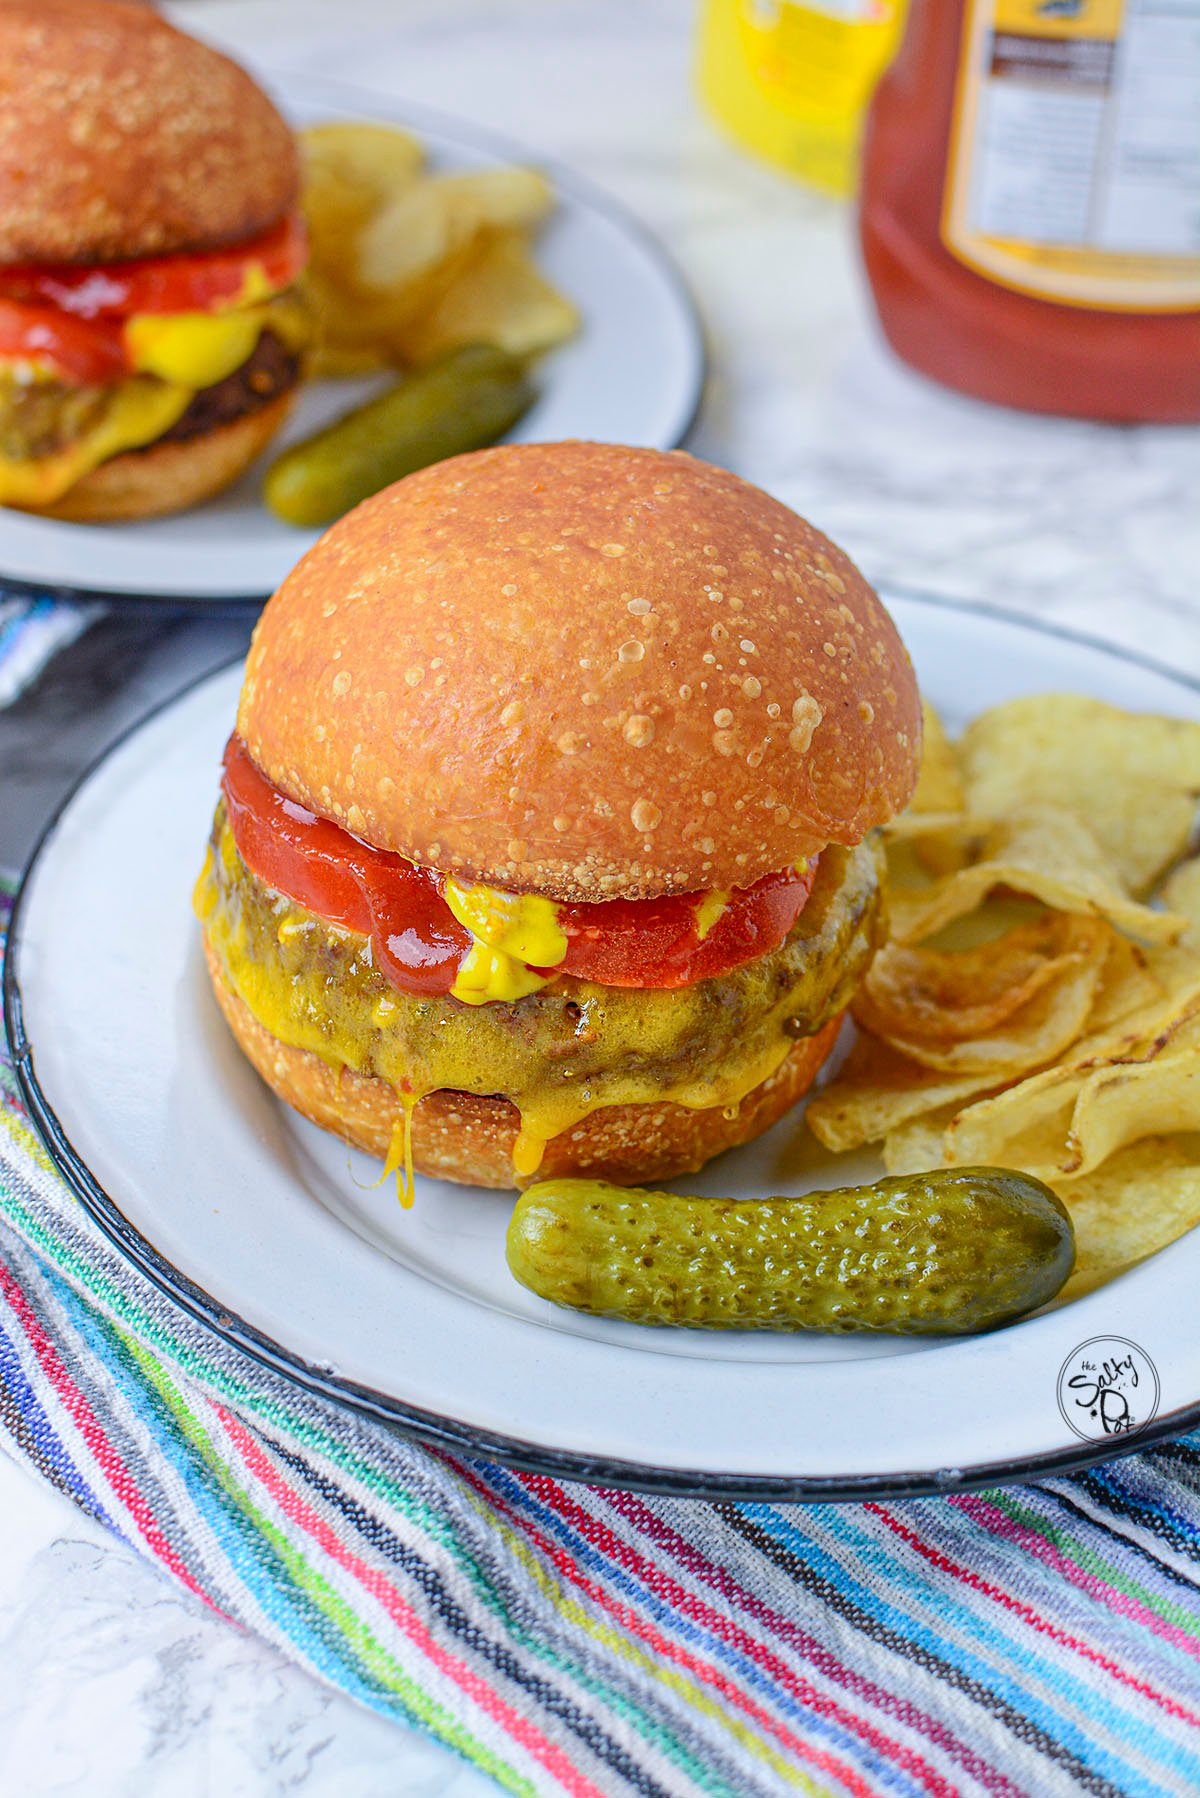 Two veggie burgers with cheese, pickles, tomatoes and condiments on white plates.